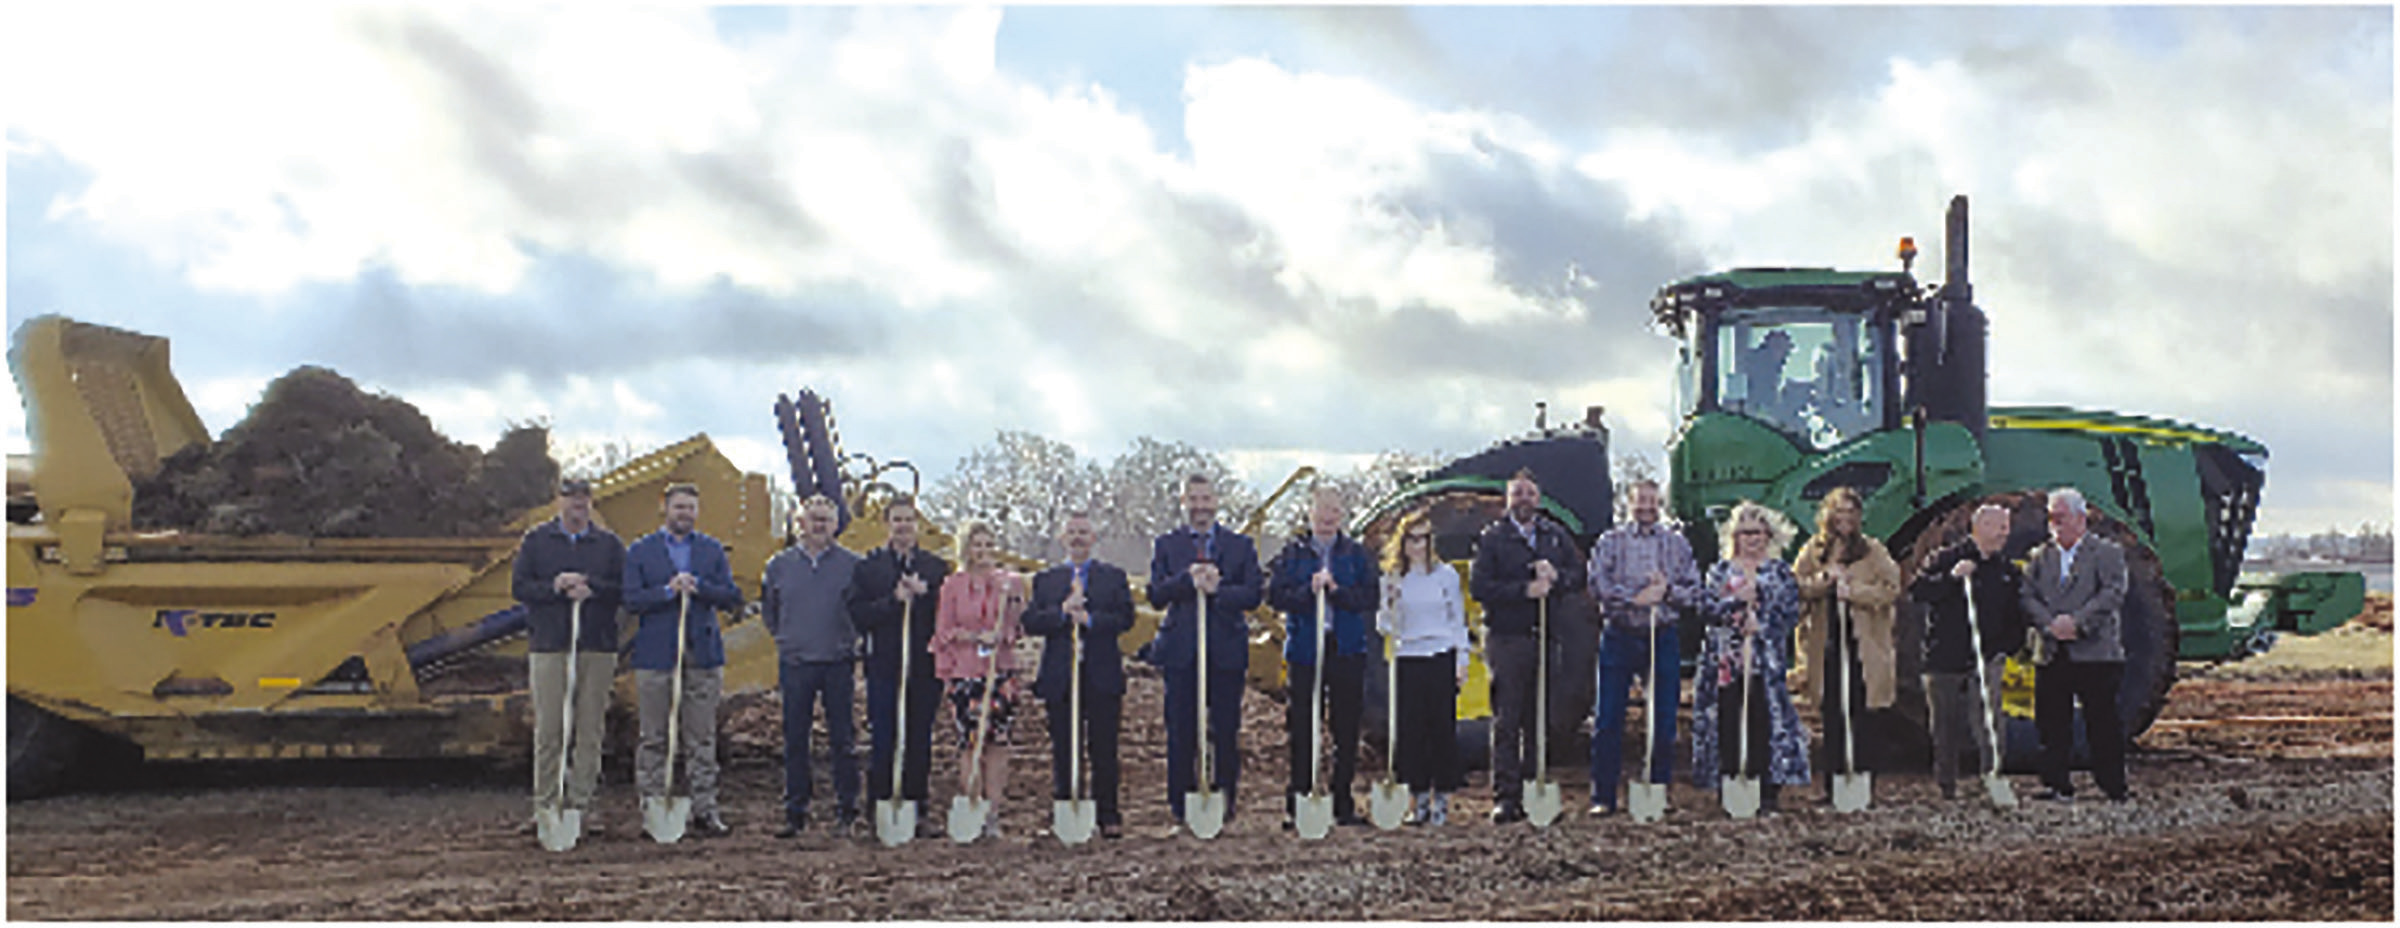 Representatives from Weatherford Public Schools, the City of Weatherford and Joe D. Hall Gen. Contractors, LLC. battle the wind to celebrate the ground breaking of the new West Elementary site Monday morning, which is the former site of the WPS transportation building.